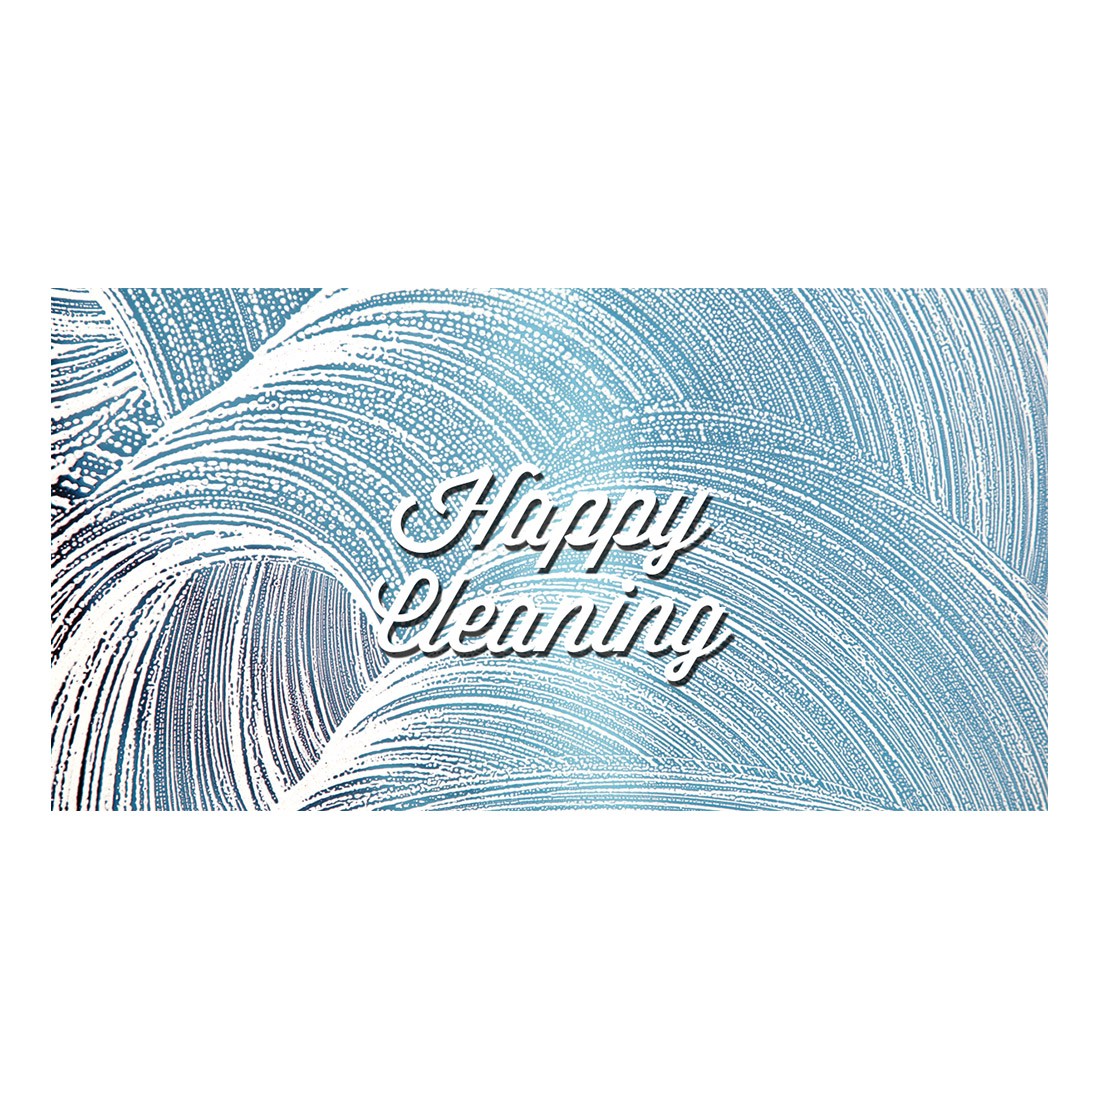 Happy Cleaning - No Logo - Facebook Ad View